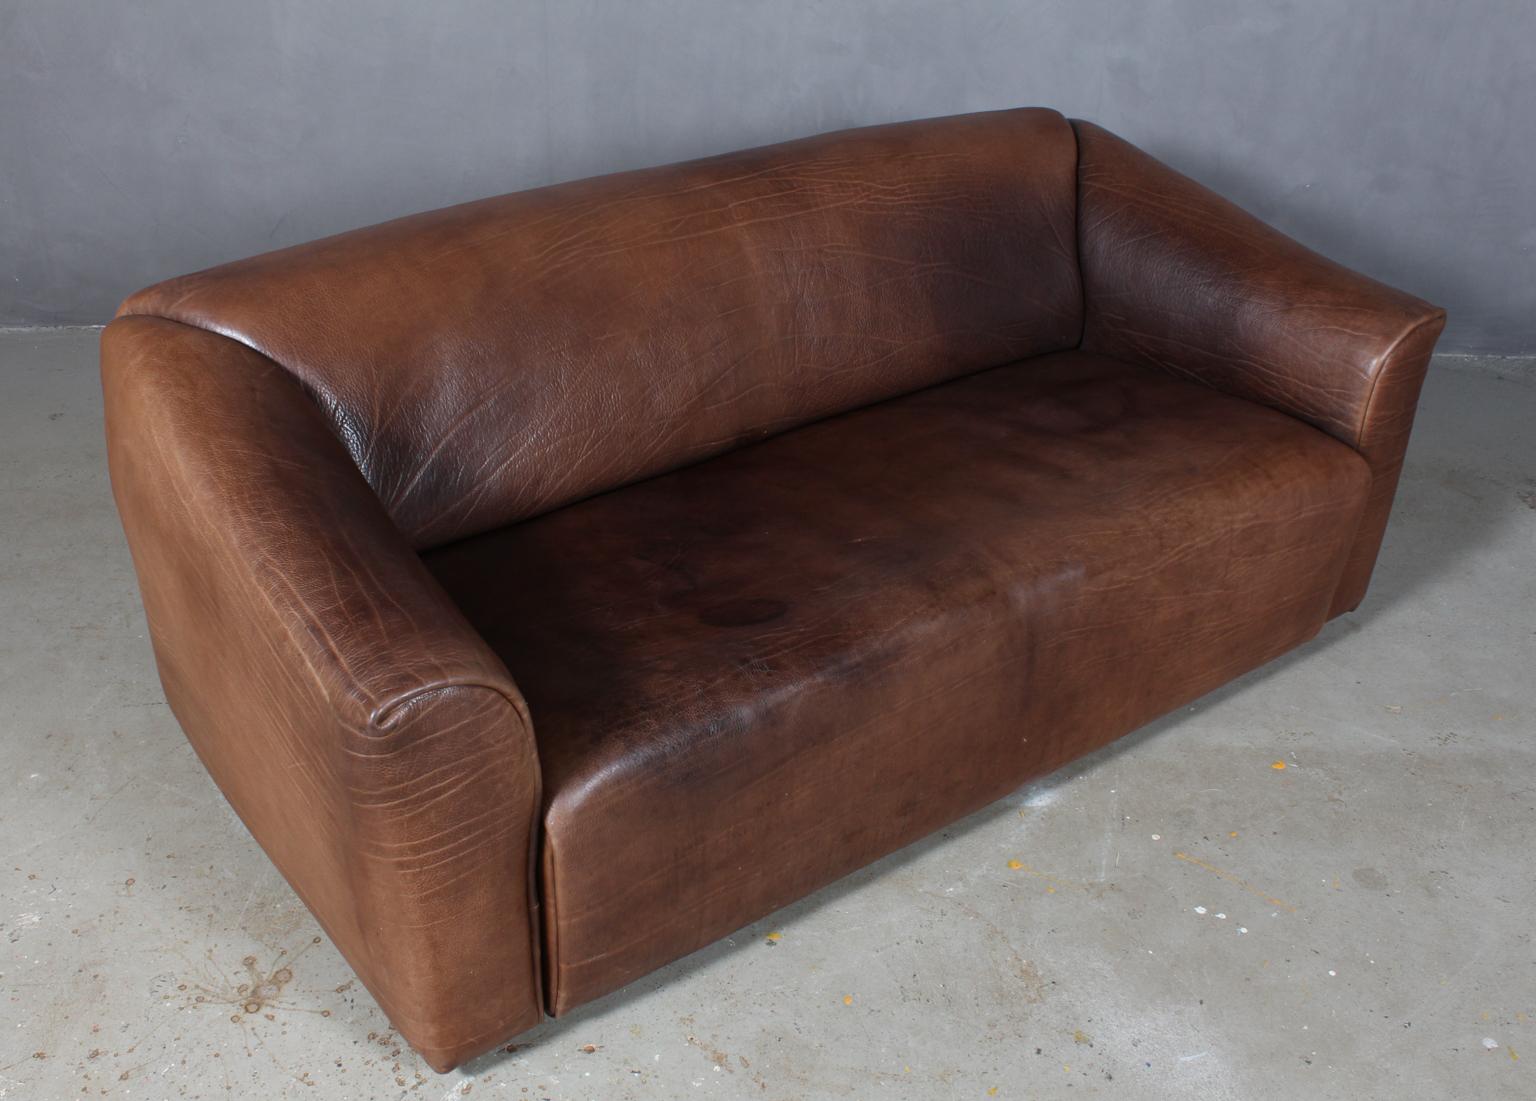 Highly comfortable DS47 sofa patinated leather by De Sede. The design is simplistic, yet very modern. A tight and cubic outside with a soft and curved inside, which emphasize the comfortable character of this set. The thick leather is laid in one